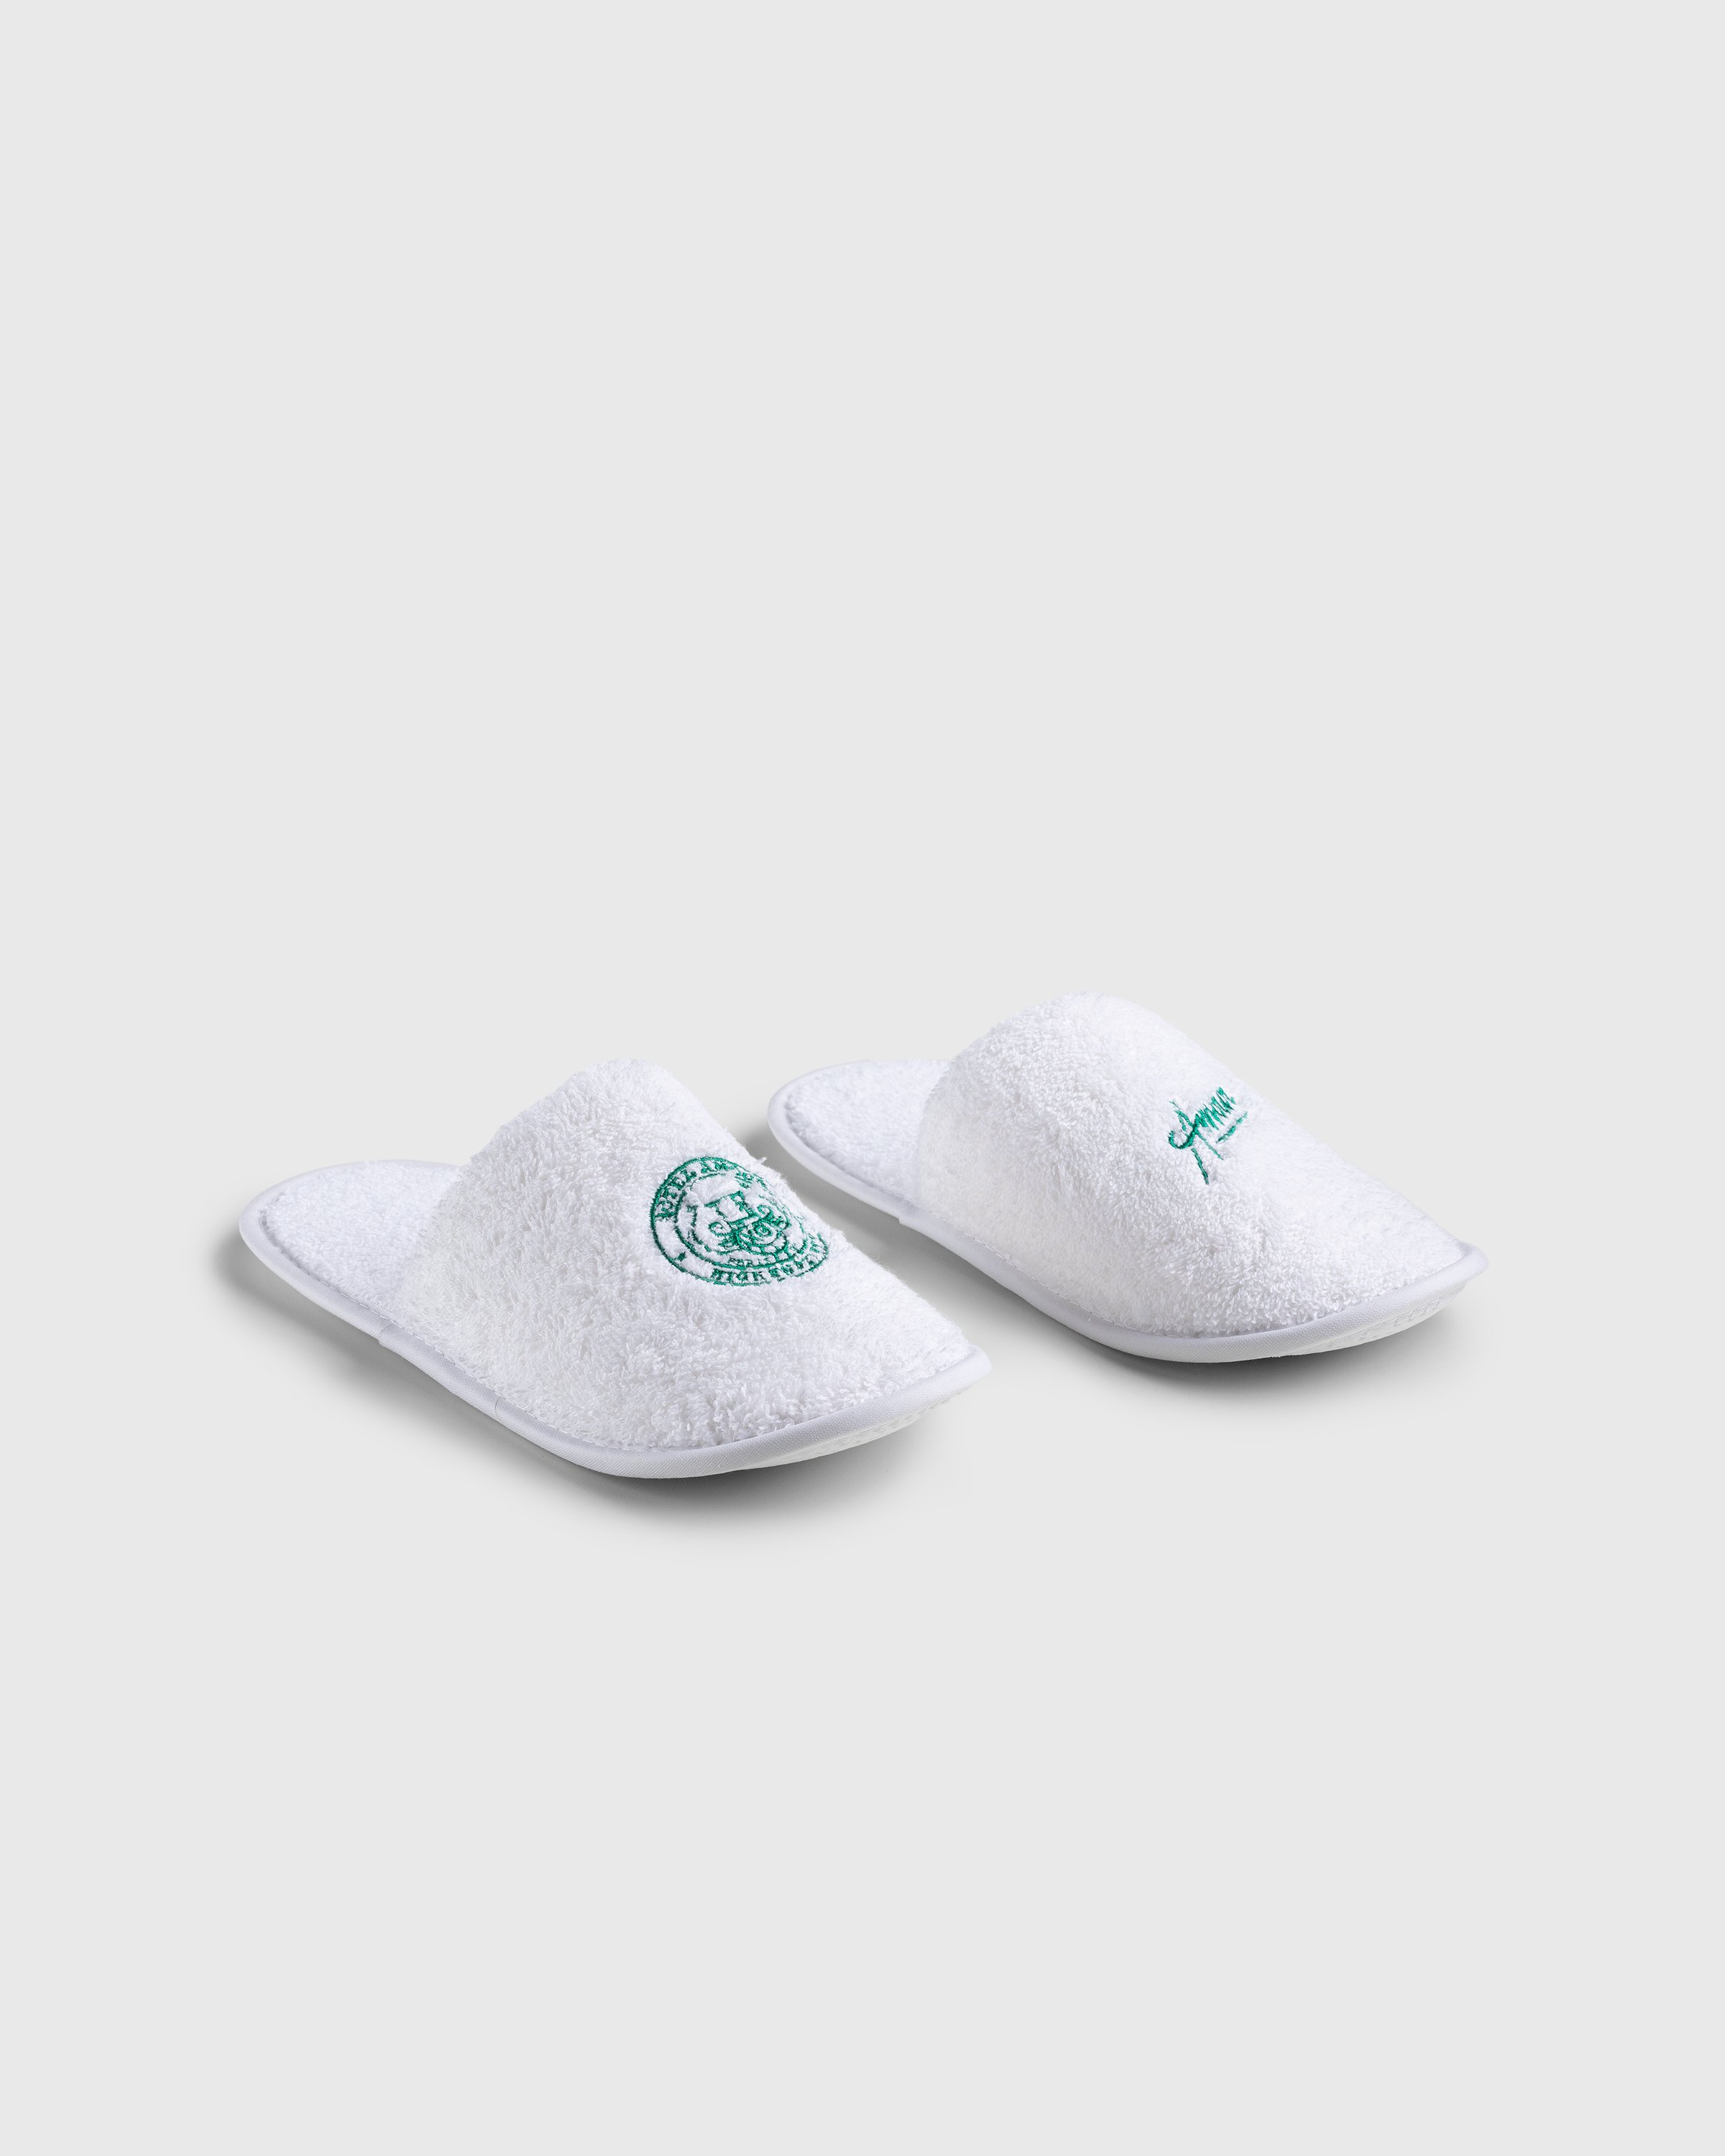 Hotel Amour x Highsnobiety - Not In Paris 4 Slippers White - Footwear - White - Image 4